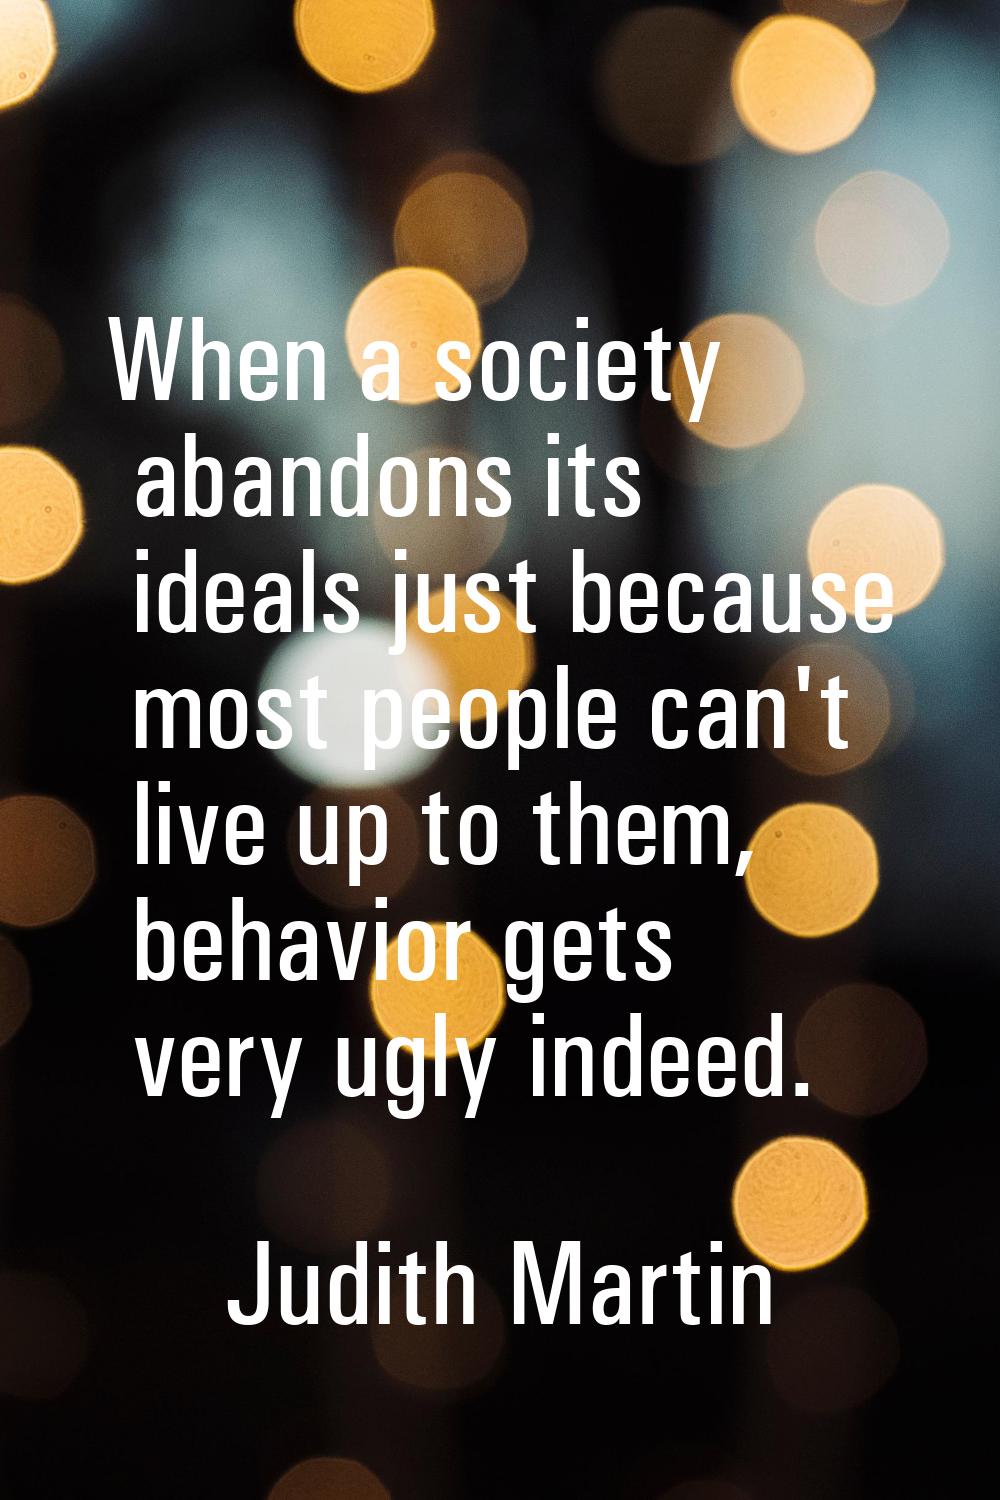 When a society abandons its ideals just because most people can't live up to them, behavior gets ve